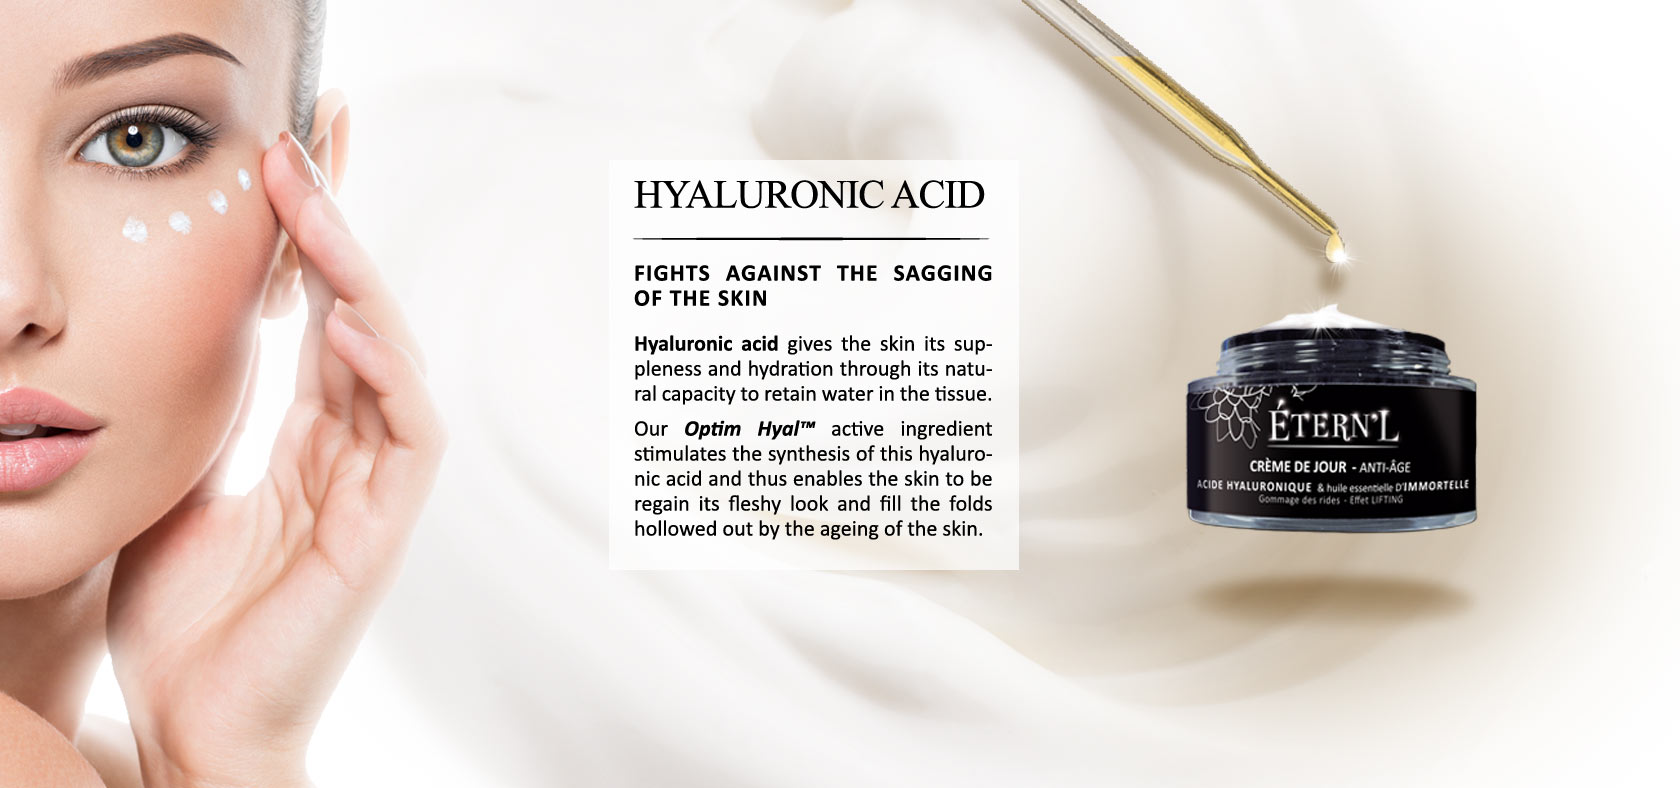 Hyaluronic acid gives the skin its suppleness and hydration through its natural capacity to retain water in the tissue. Our Optim Hyal© active ingredient stimulates the synthesis of this hyaluronic acid and thus enables the skin to be regain its fleshy lo